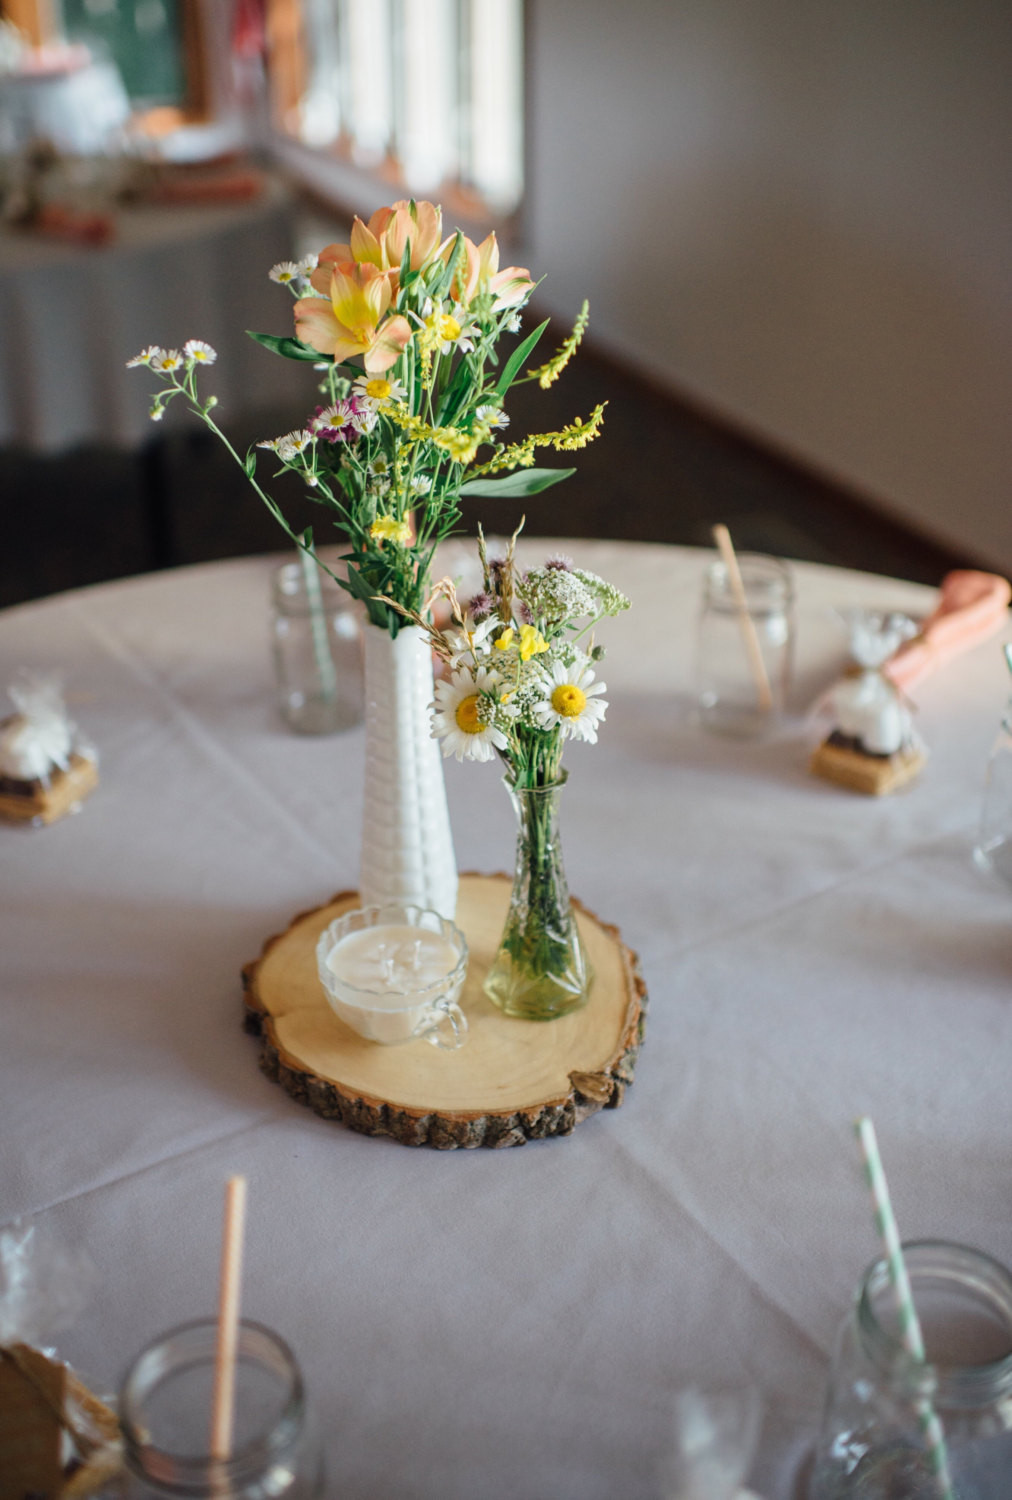 Where To Buy Wedding Decorations
 Wood Slices for Wedding Centerpieces Where to Buy